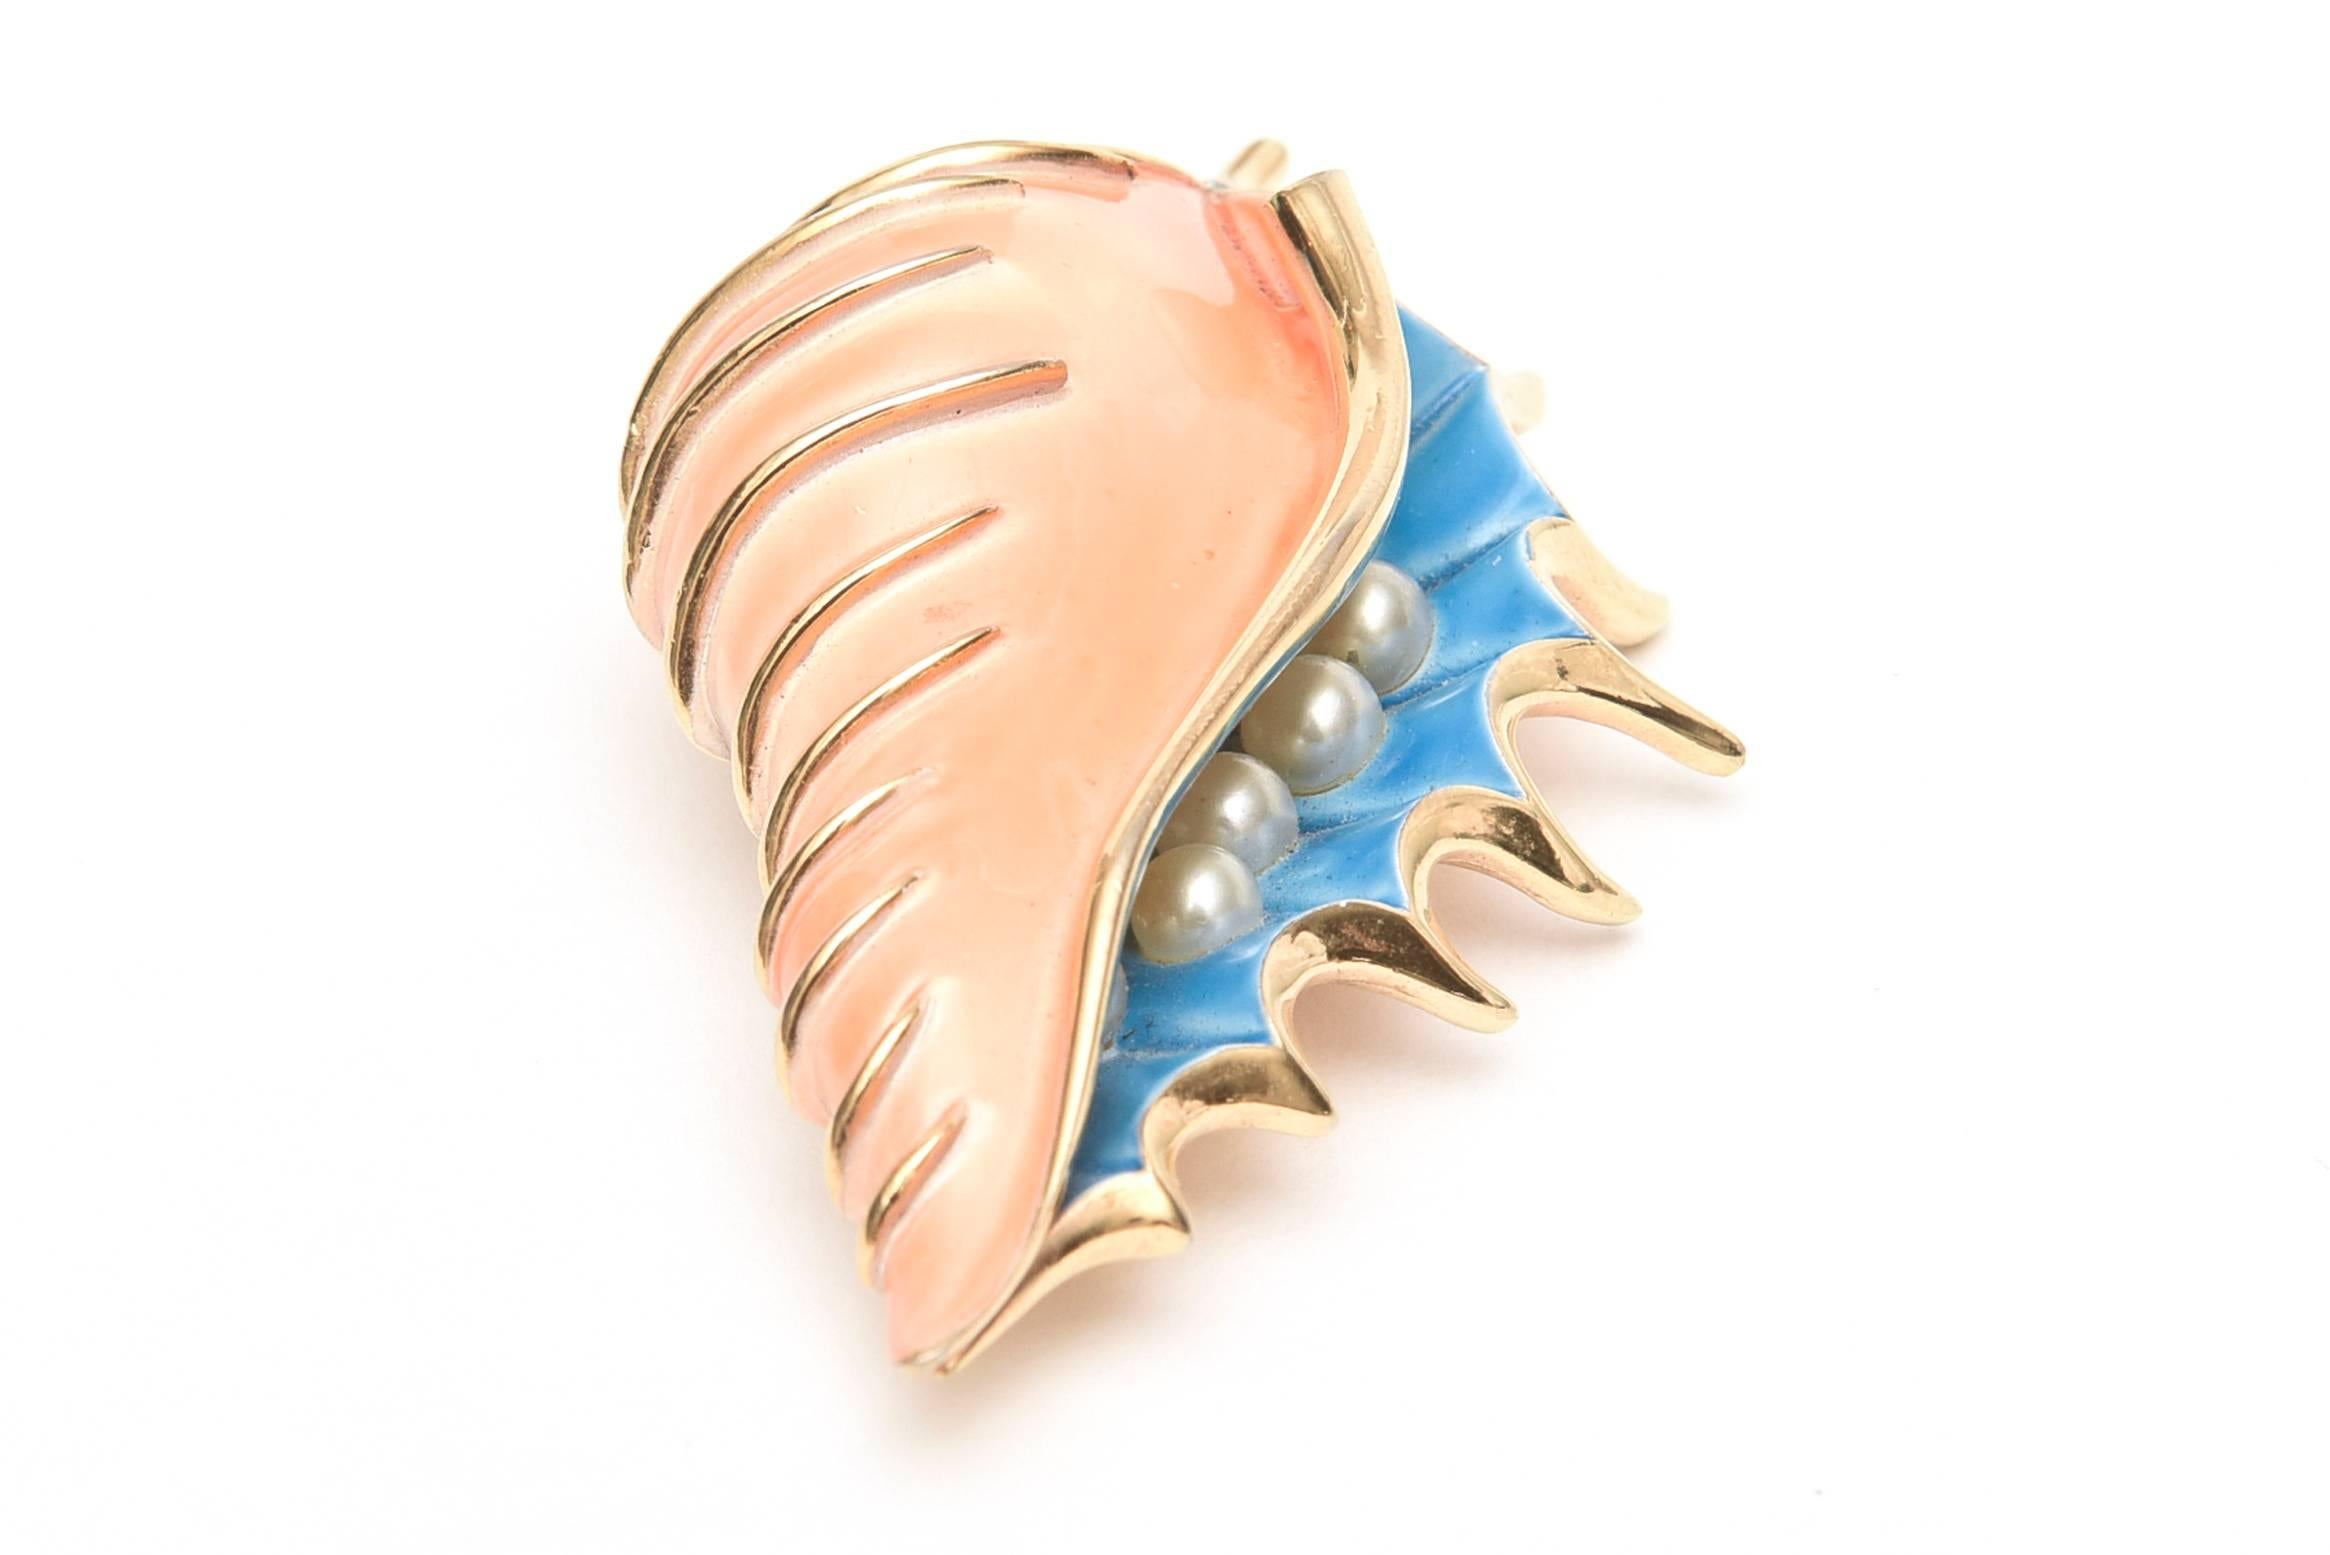 This beautiful enamel vintage pin signed Trifari has the gorgeous juxtaposition of the coral and sapphire blue against the gold plated metal. The interior of the shell is faux pearl. This is a now a beautiful and hard to find Trifari pin to come by